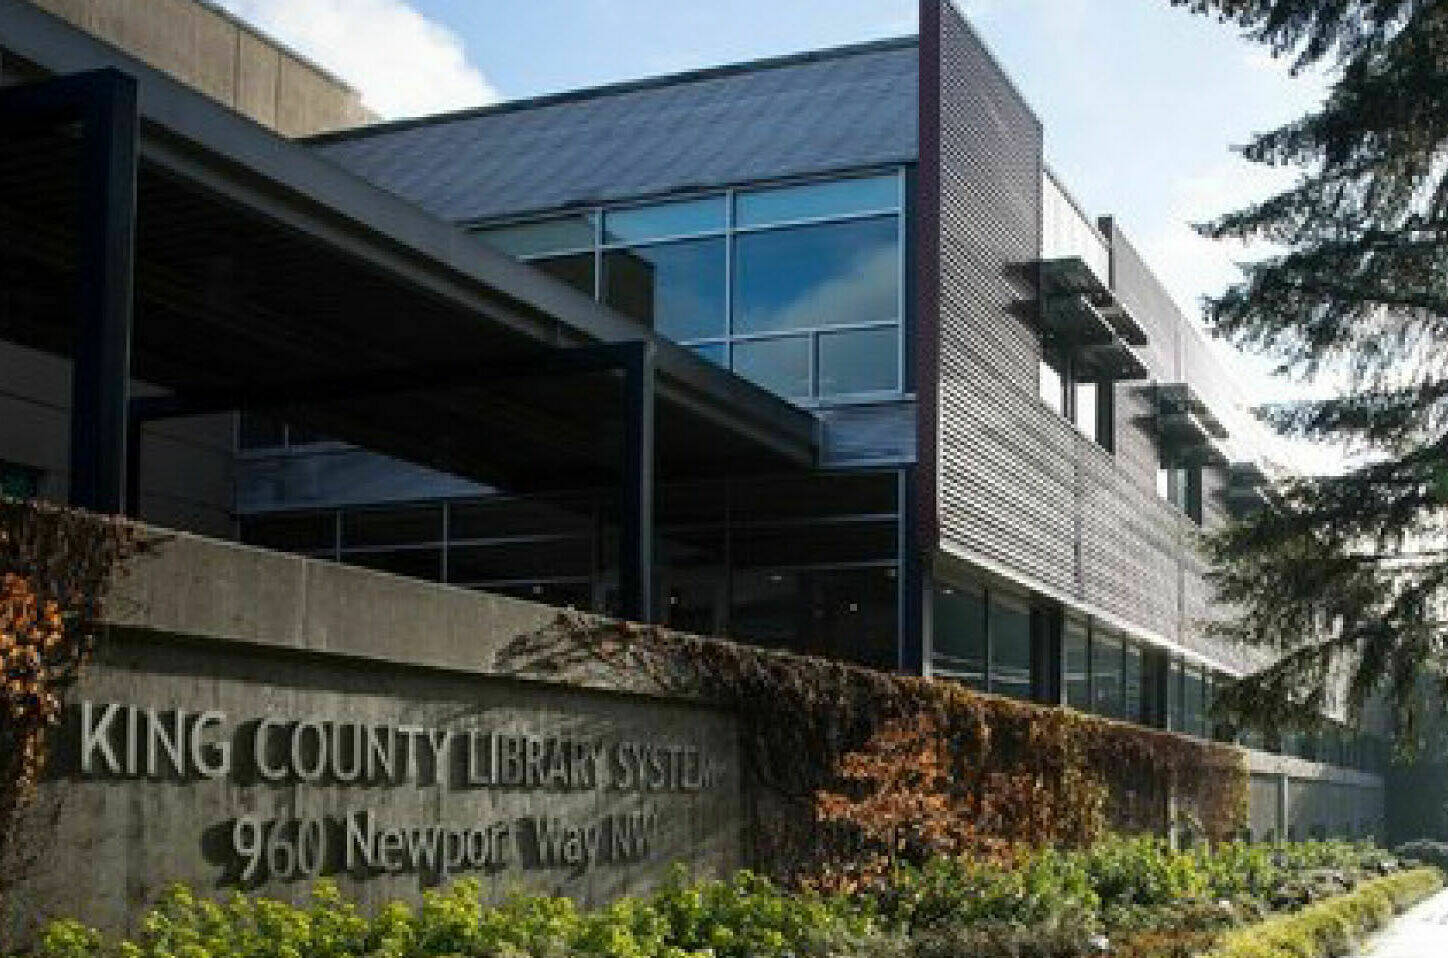 The King County Library System administration building in Issaquah. Photo courtesy KCLS